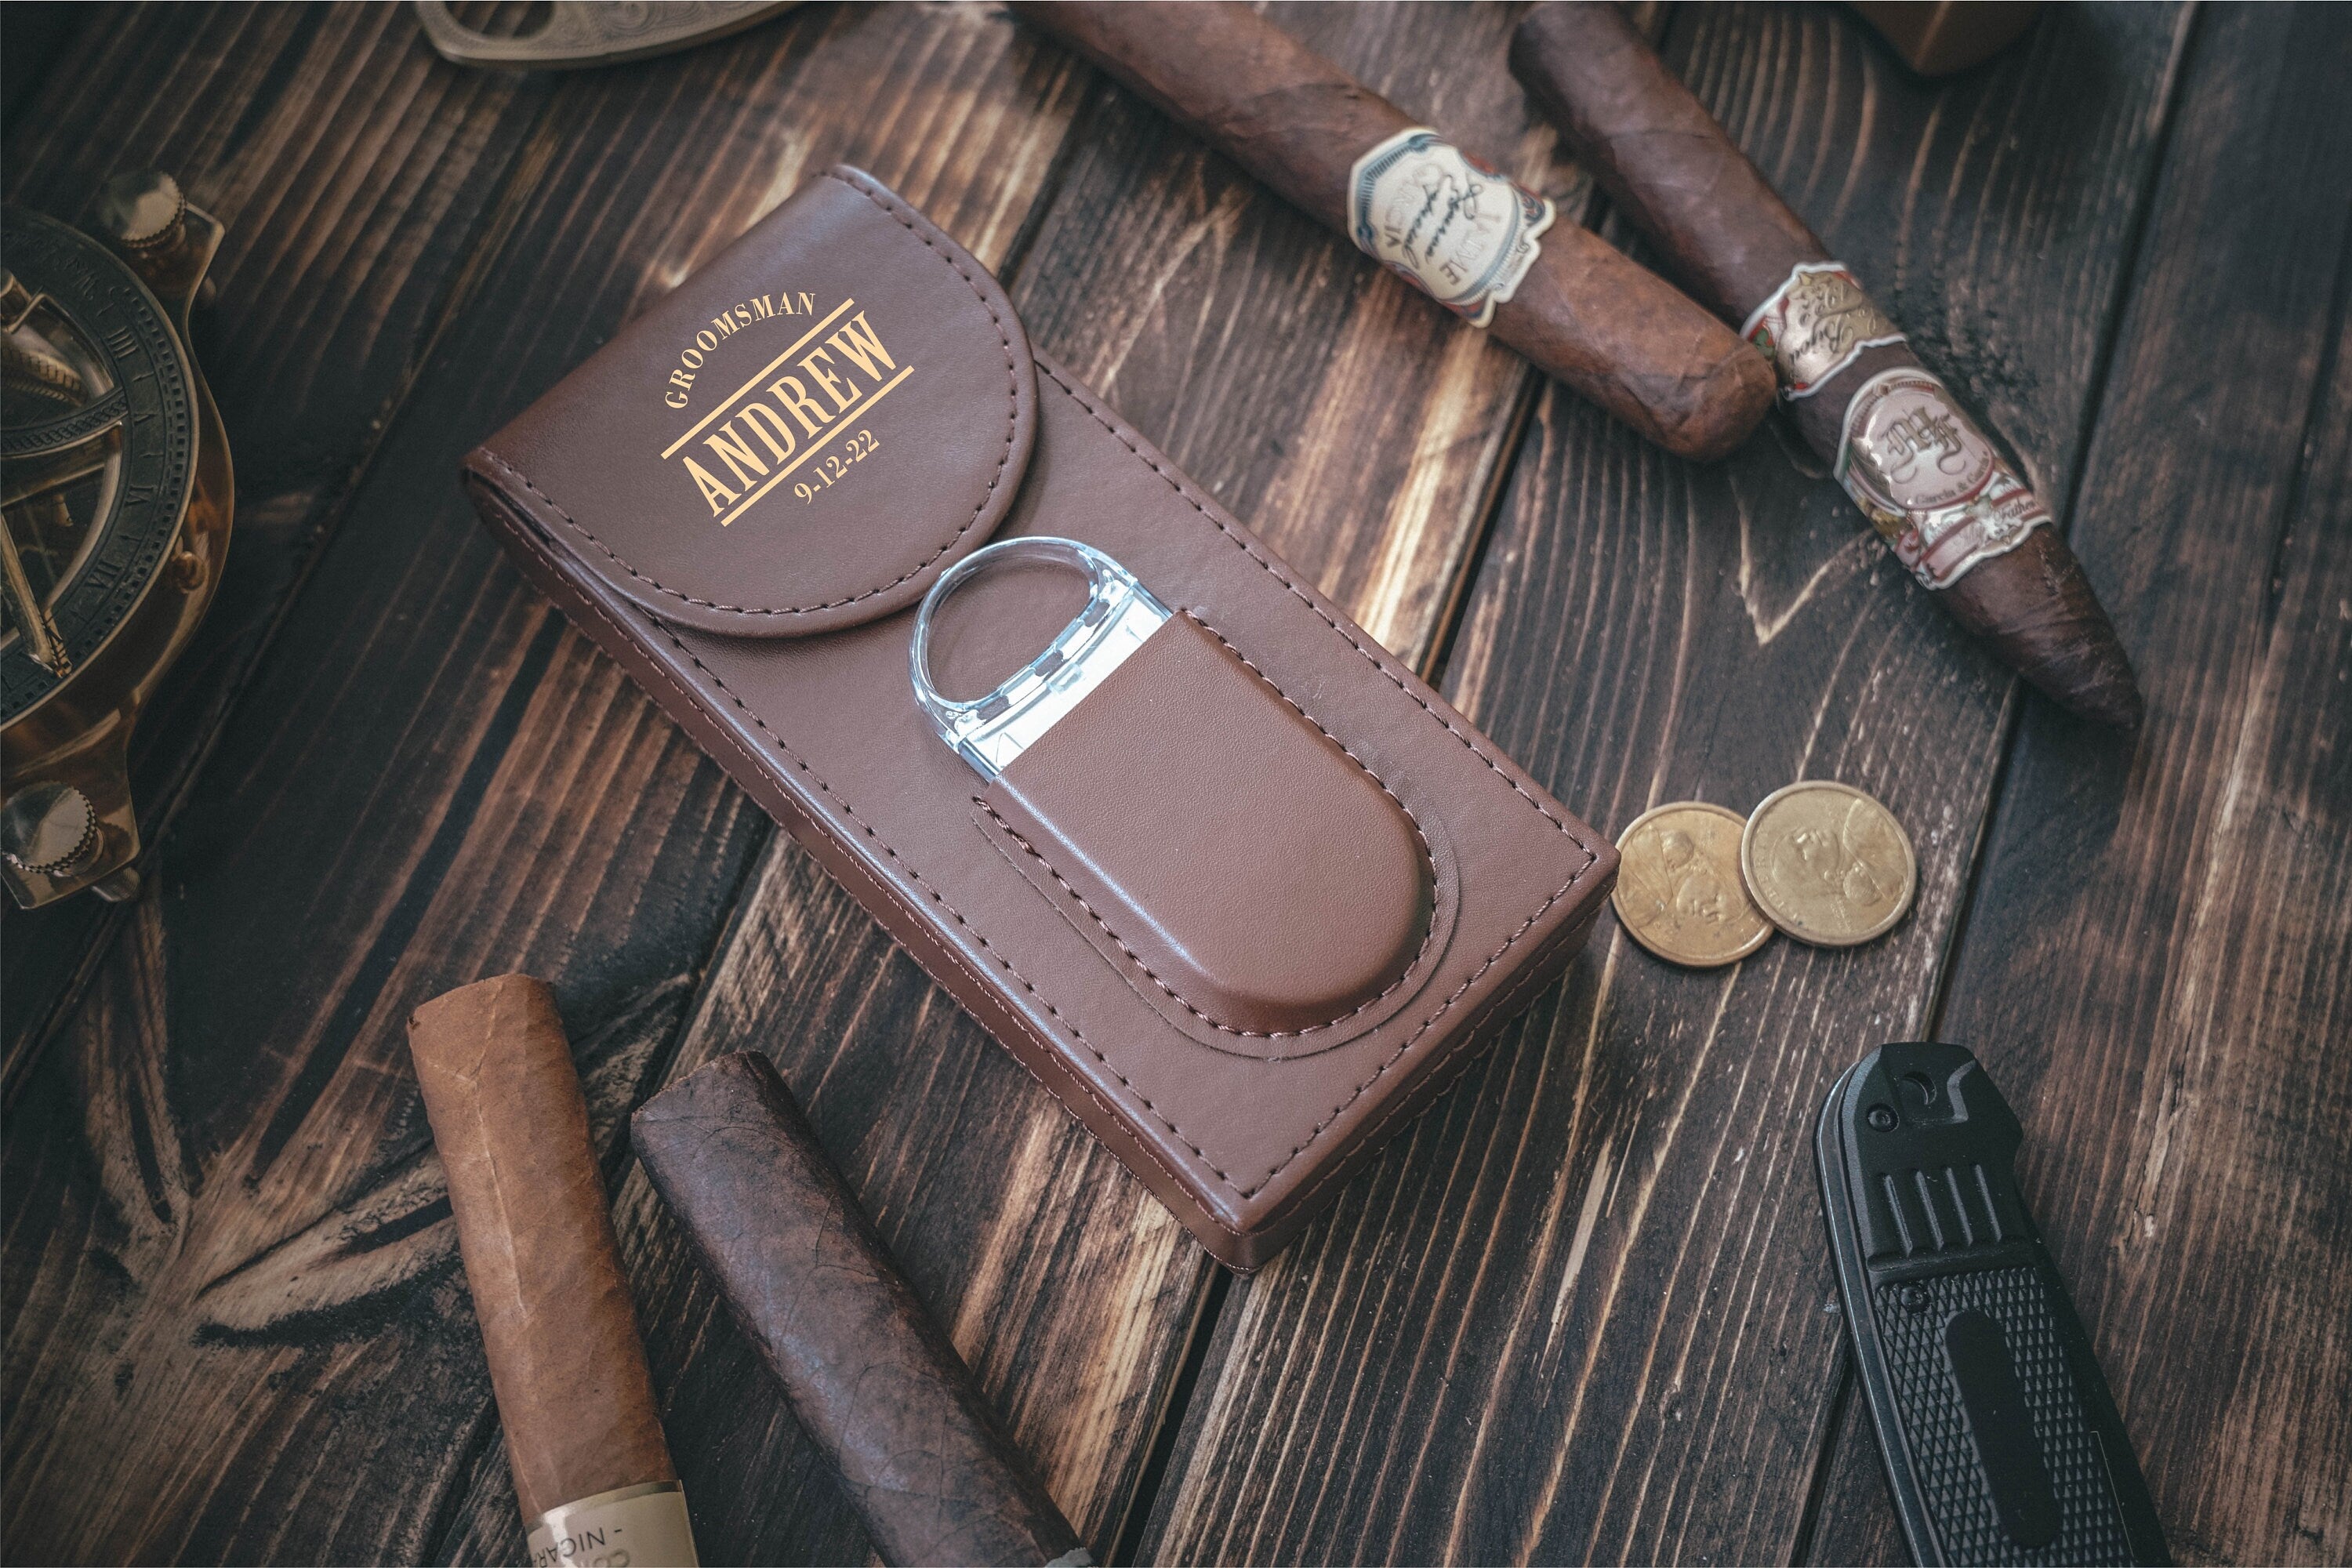 Large Travel Cigar Case genuine Leather & Wood Personalized by Your Name  and Logo 